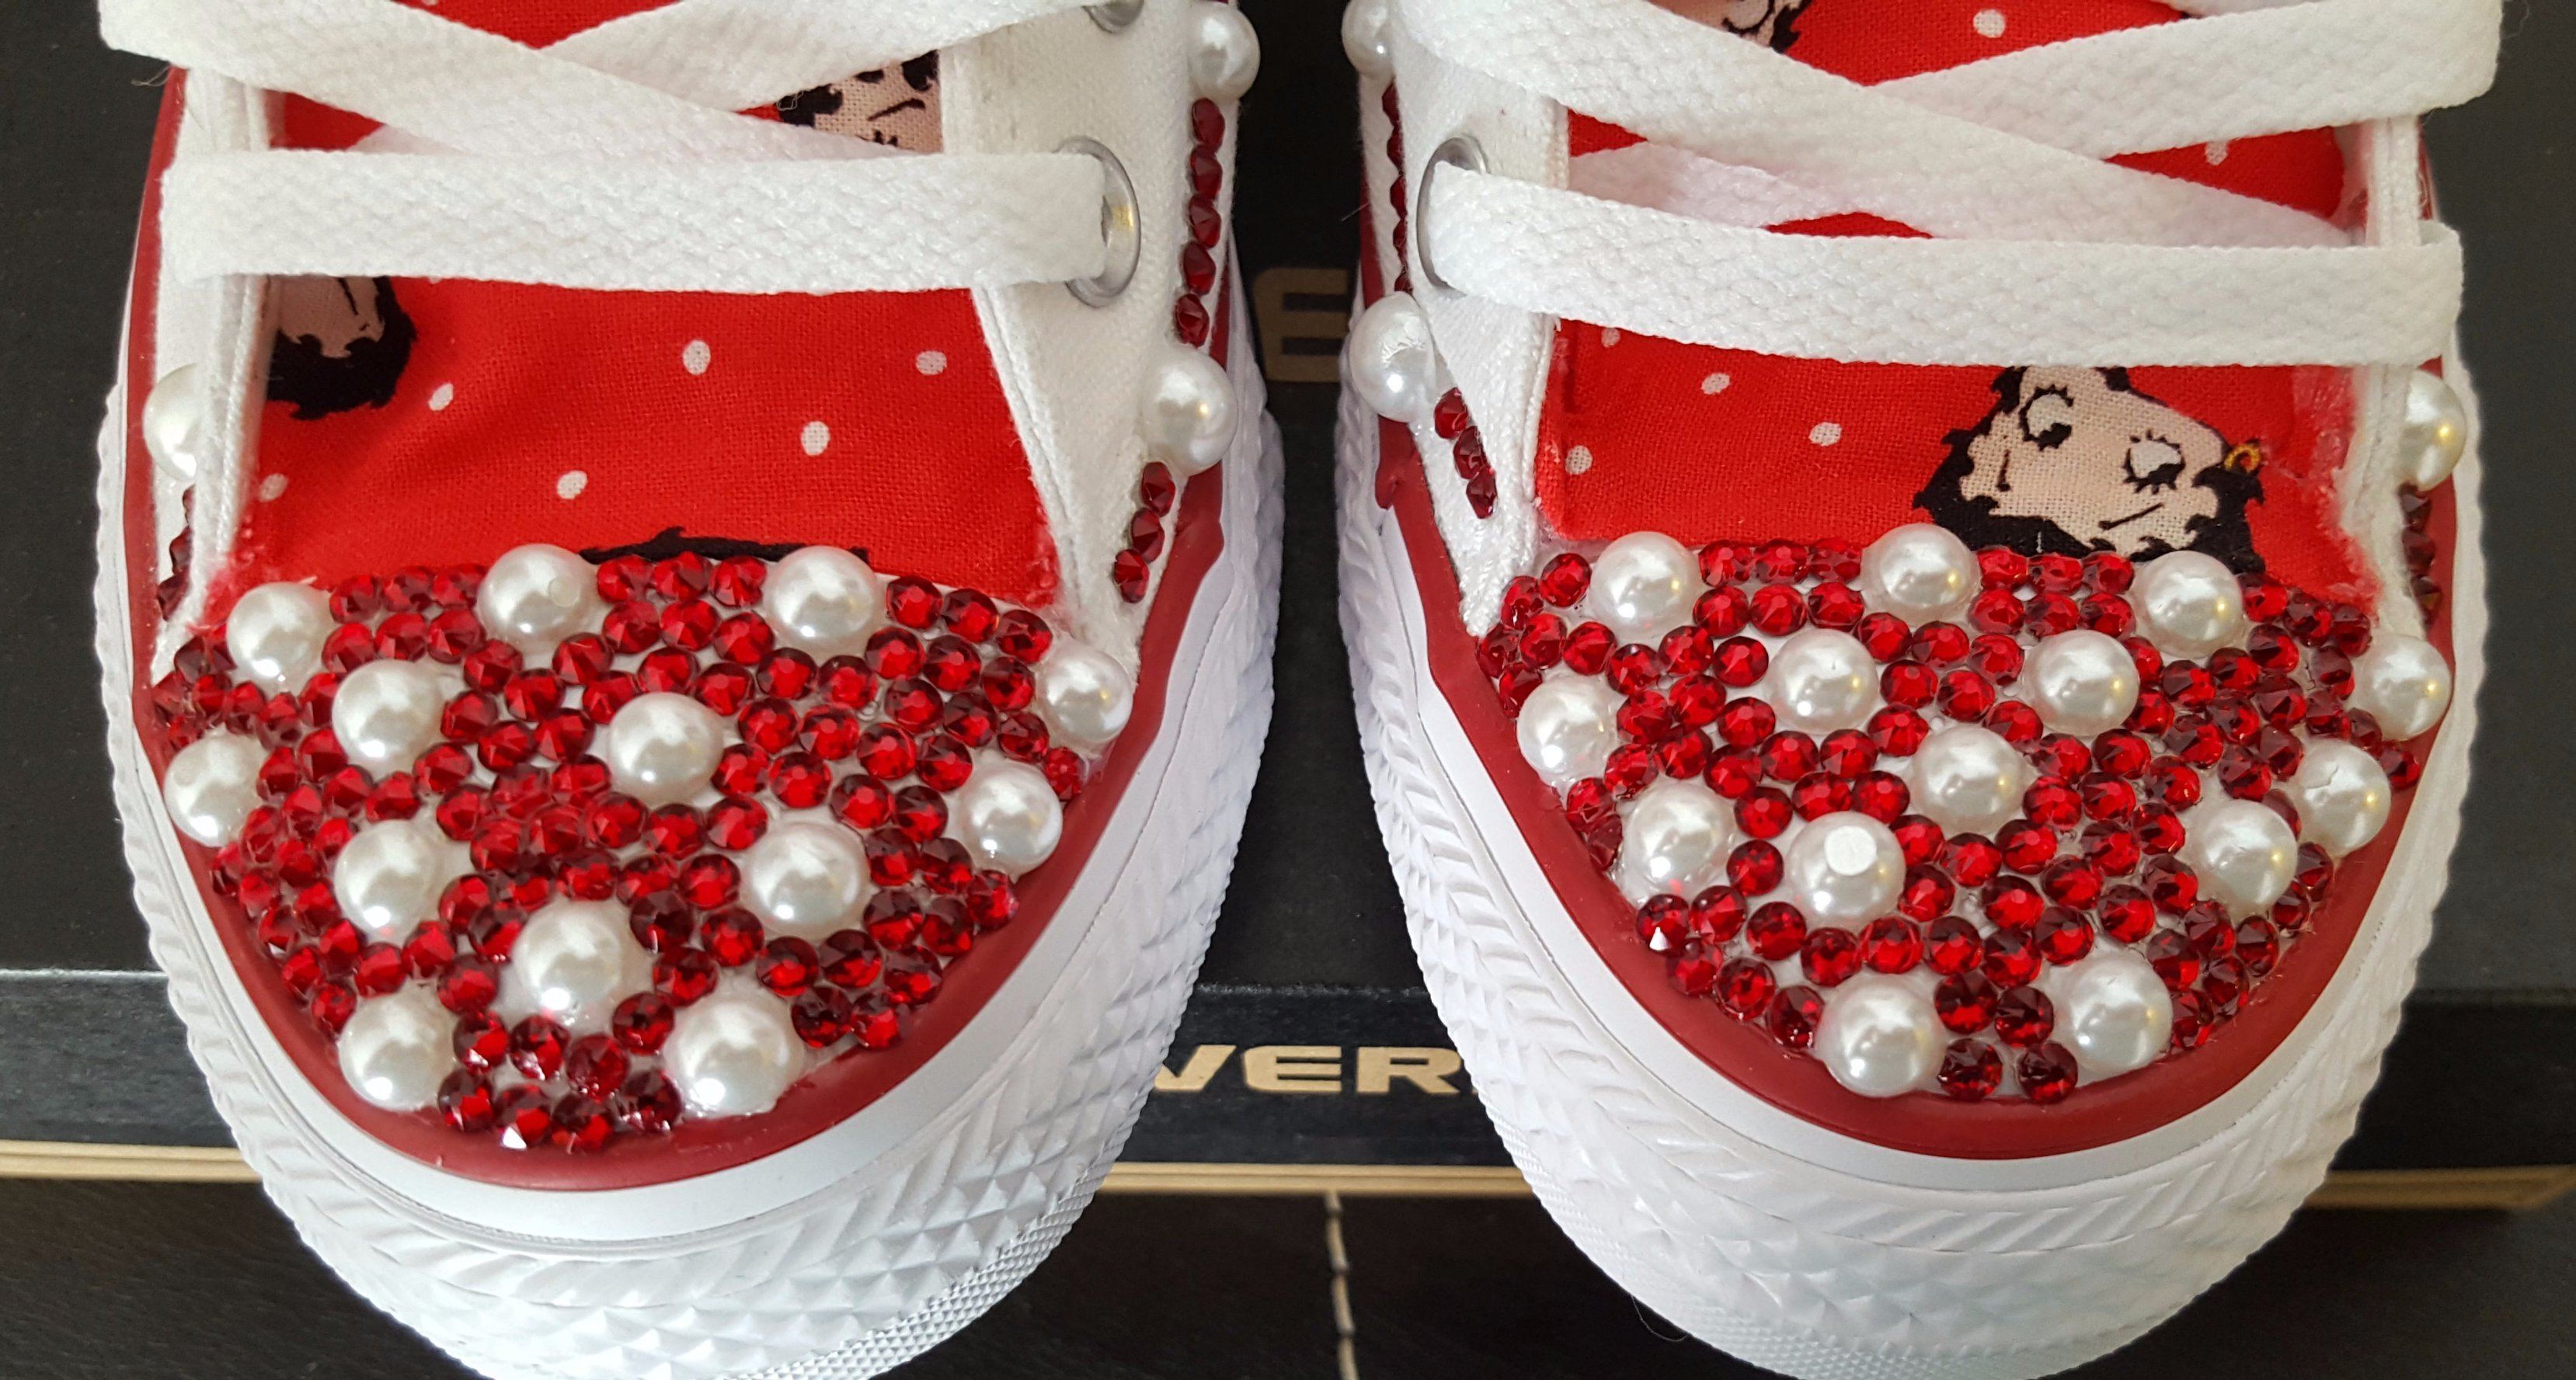 Bedazzled BETTY BOOP High-Top ALL STAR Converses- Special Edition.-CONVERSE-Get Me Bedazzled